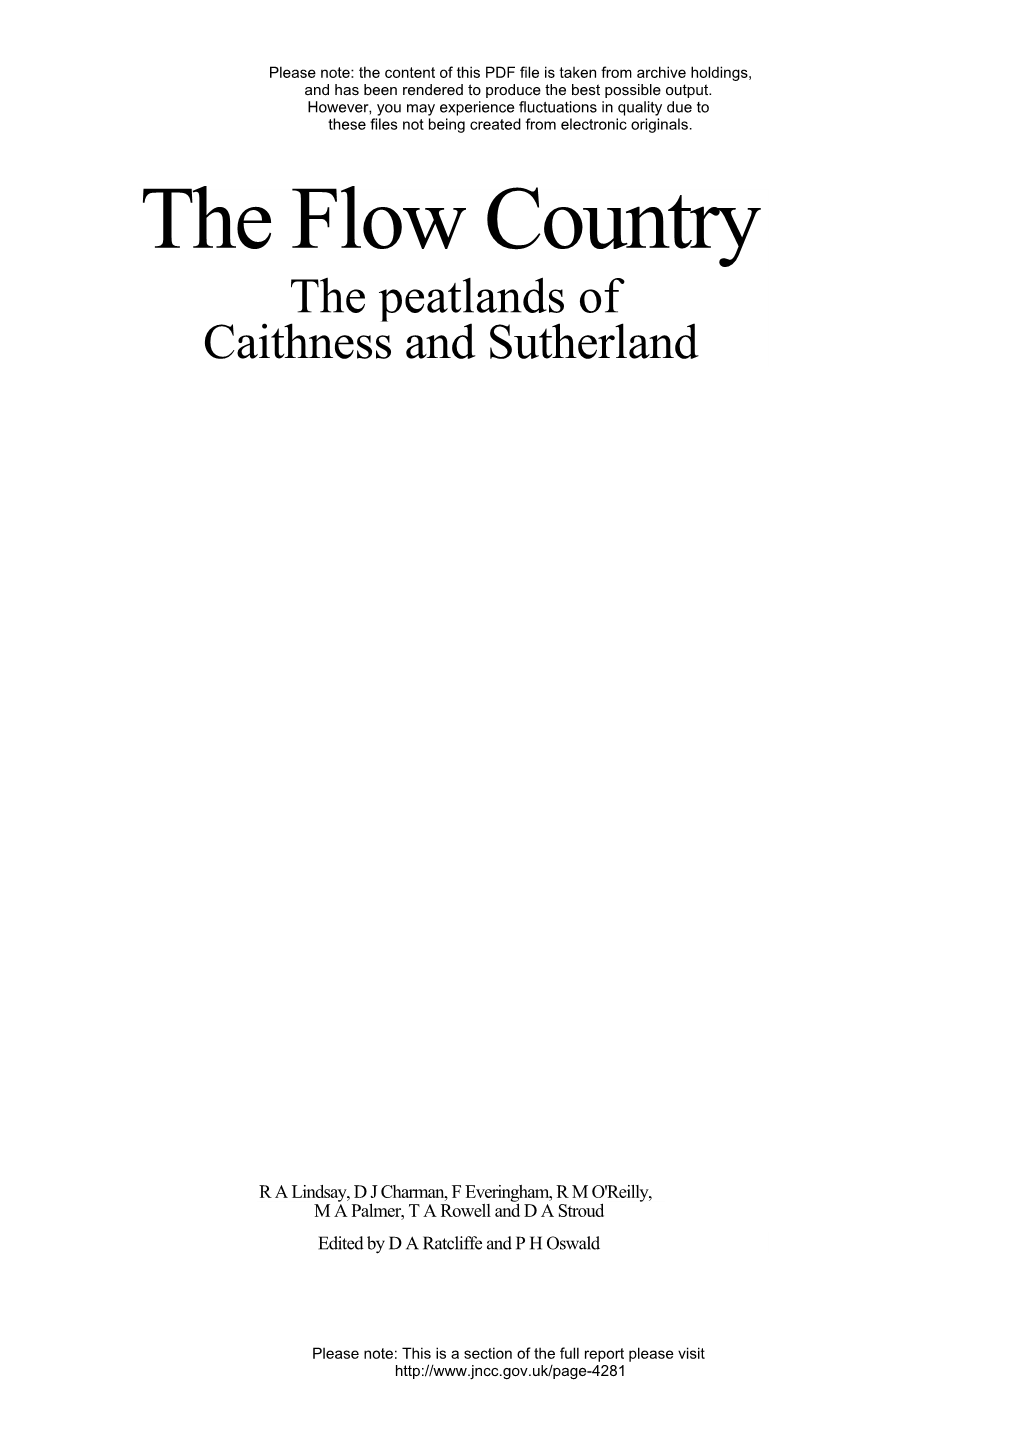 The Flow Country the Peatlands of Caithness and Sutherland